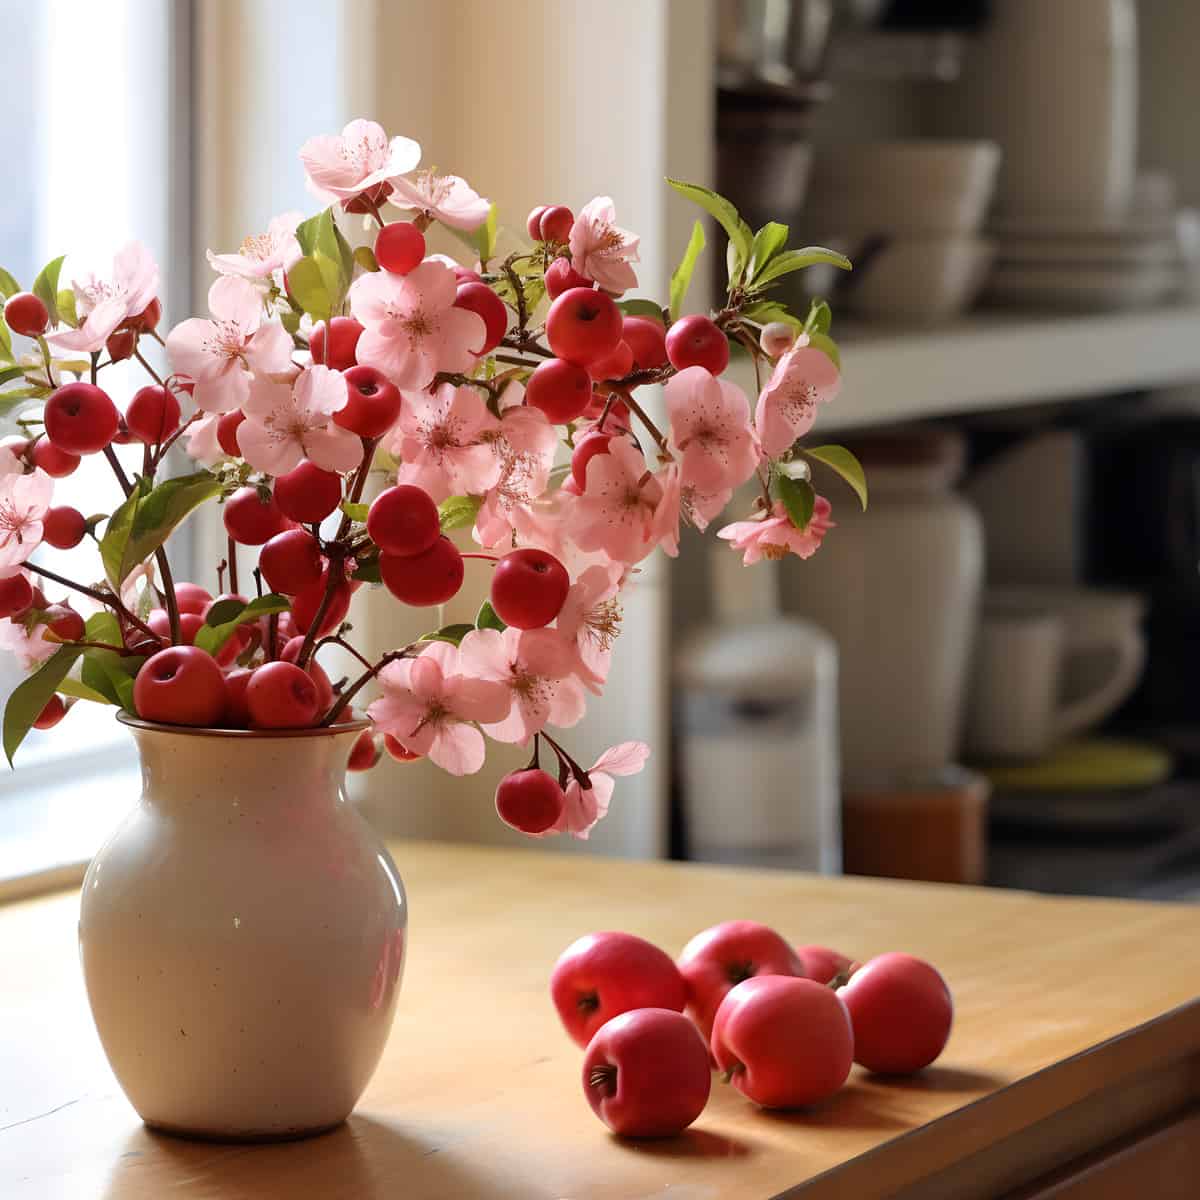 Southern Crabapple on a kitchen counter